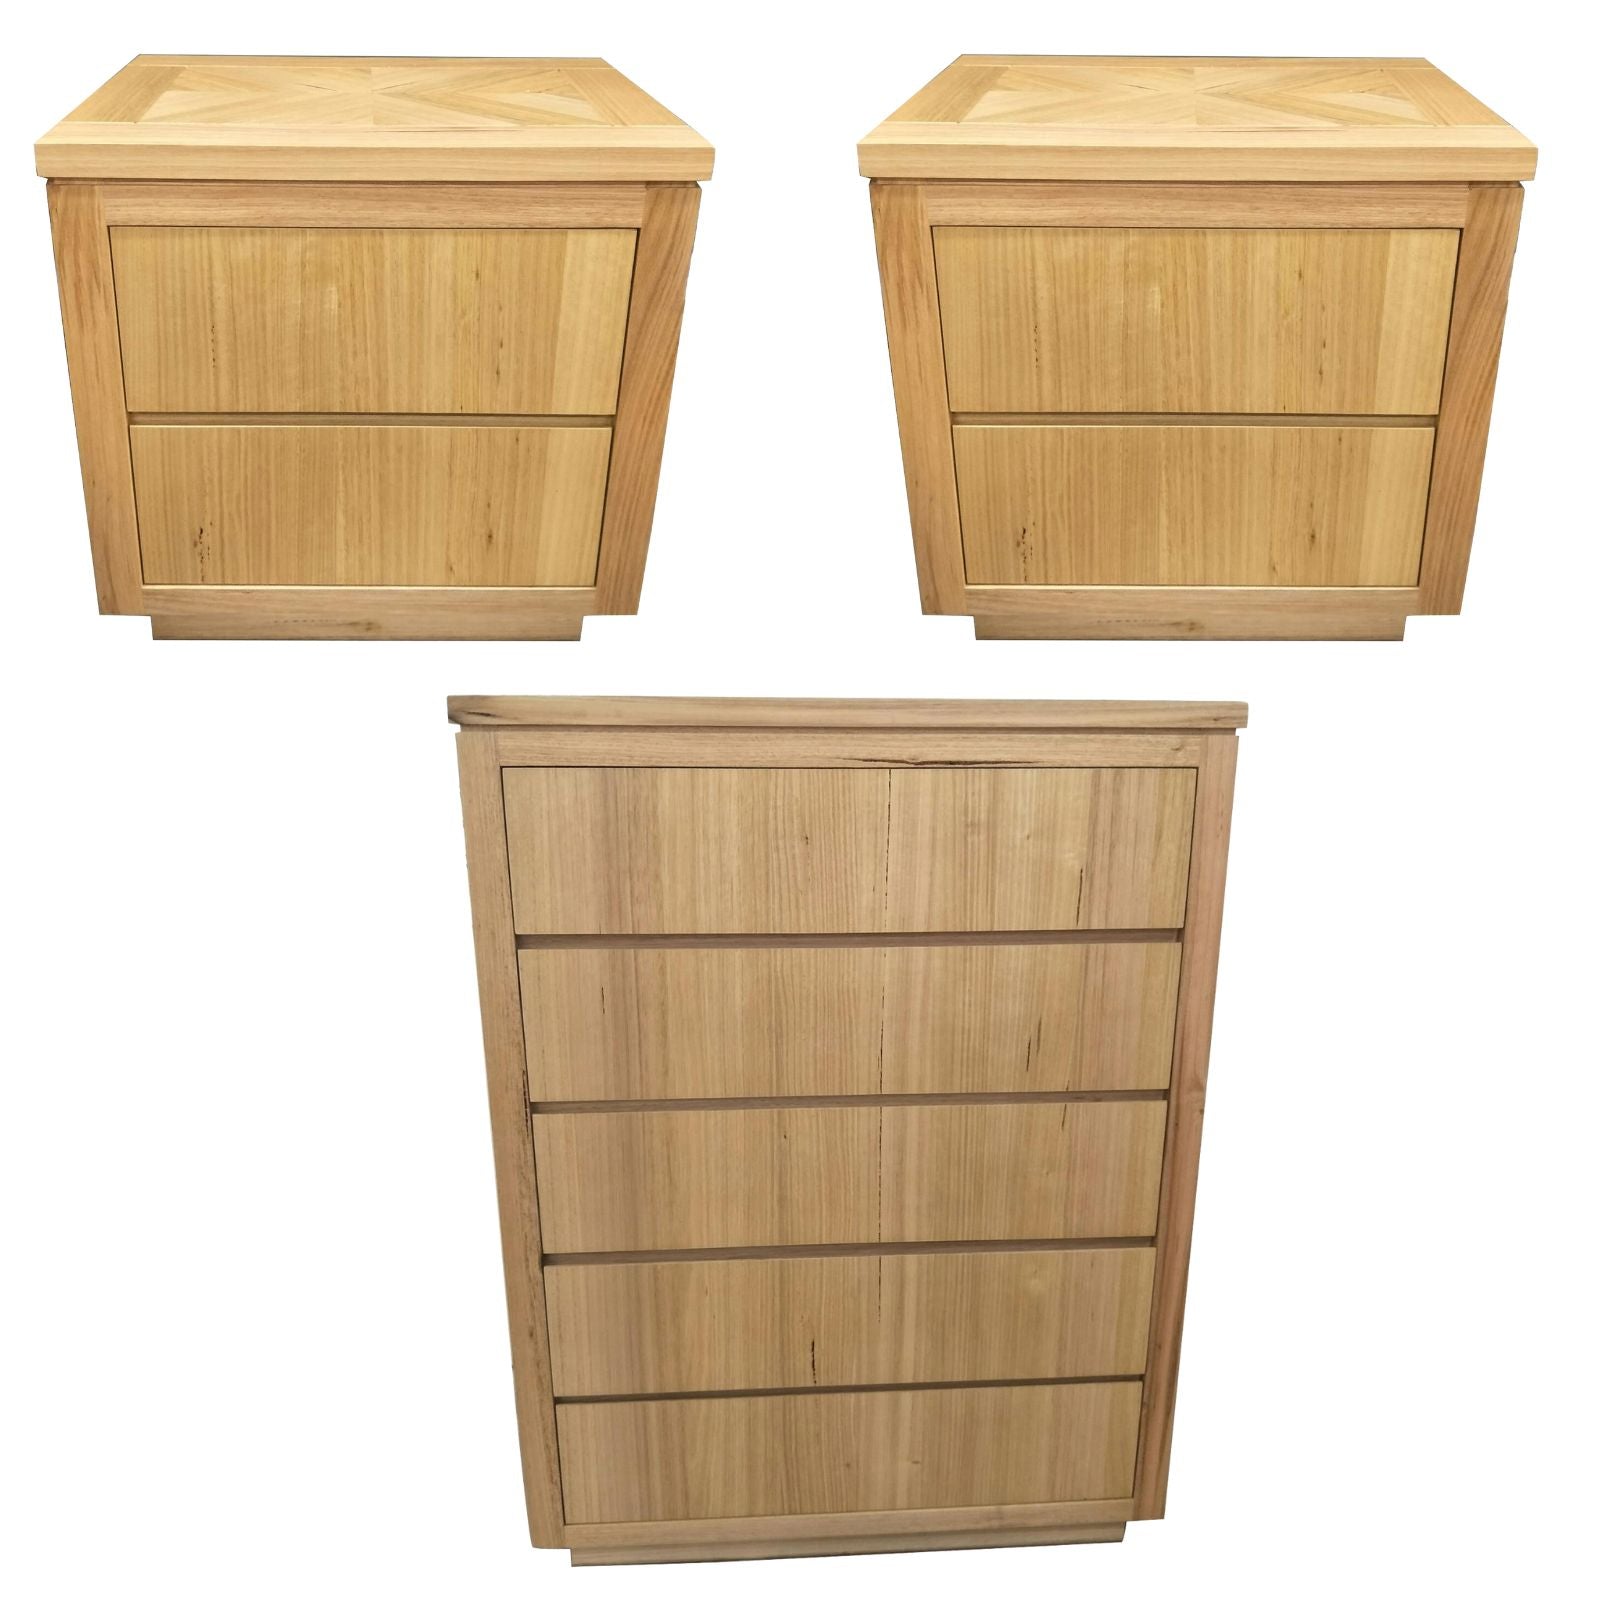 No Assembly Required on this Three Piece Bedrom Bundle - Two Bedside Tables and Tallboy